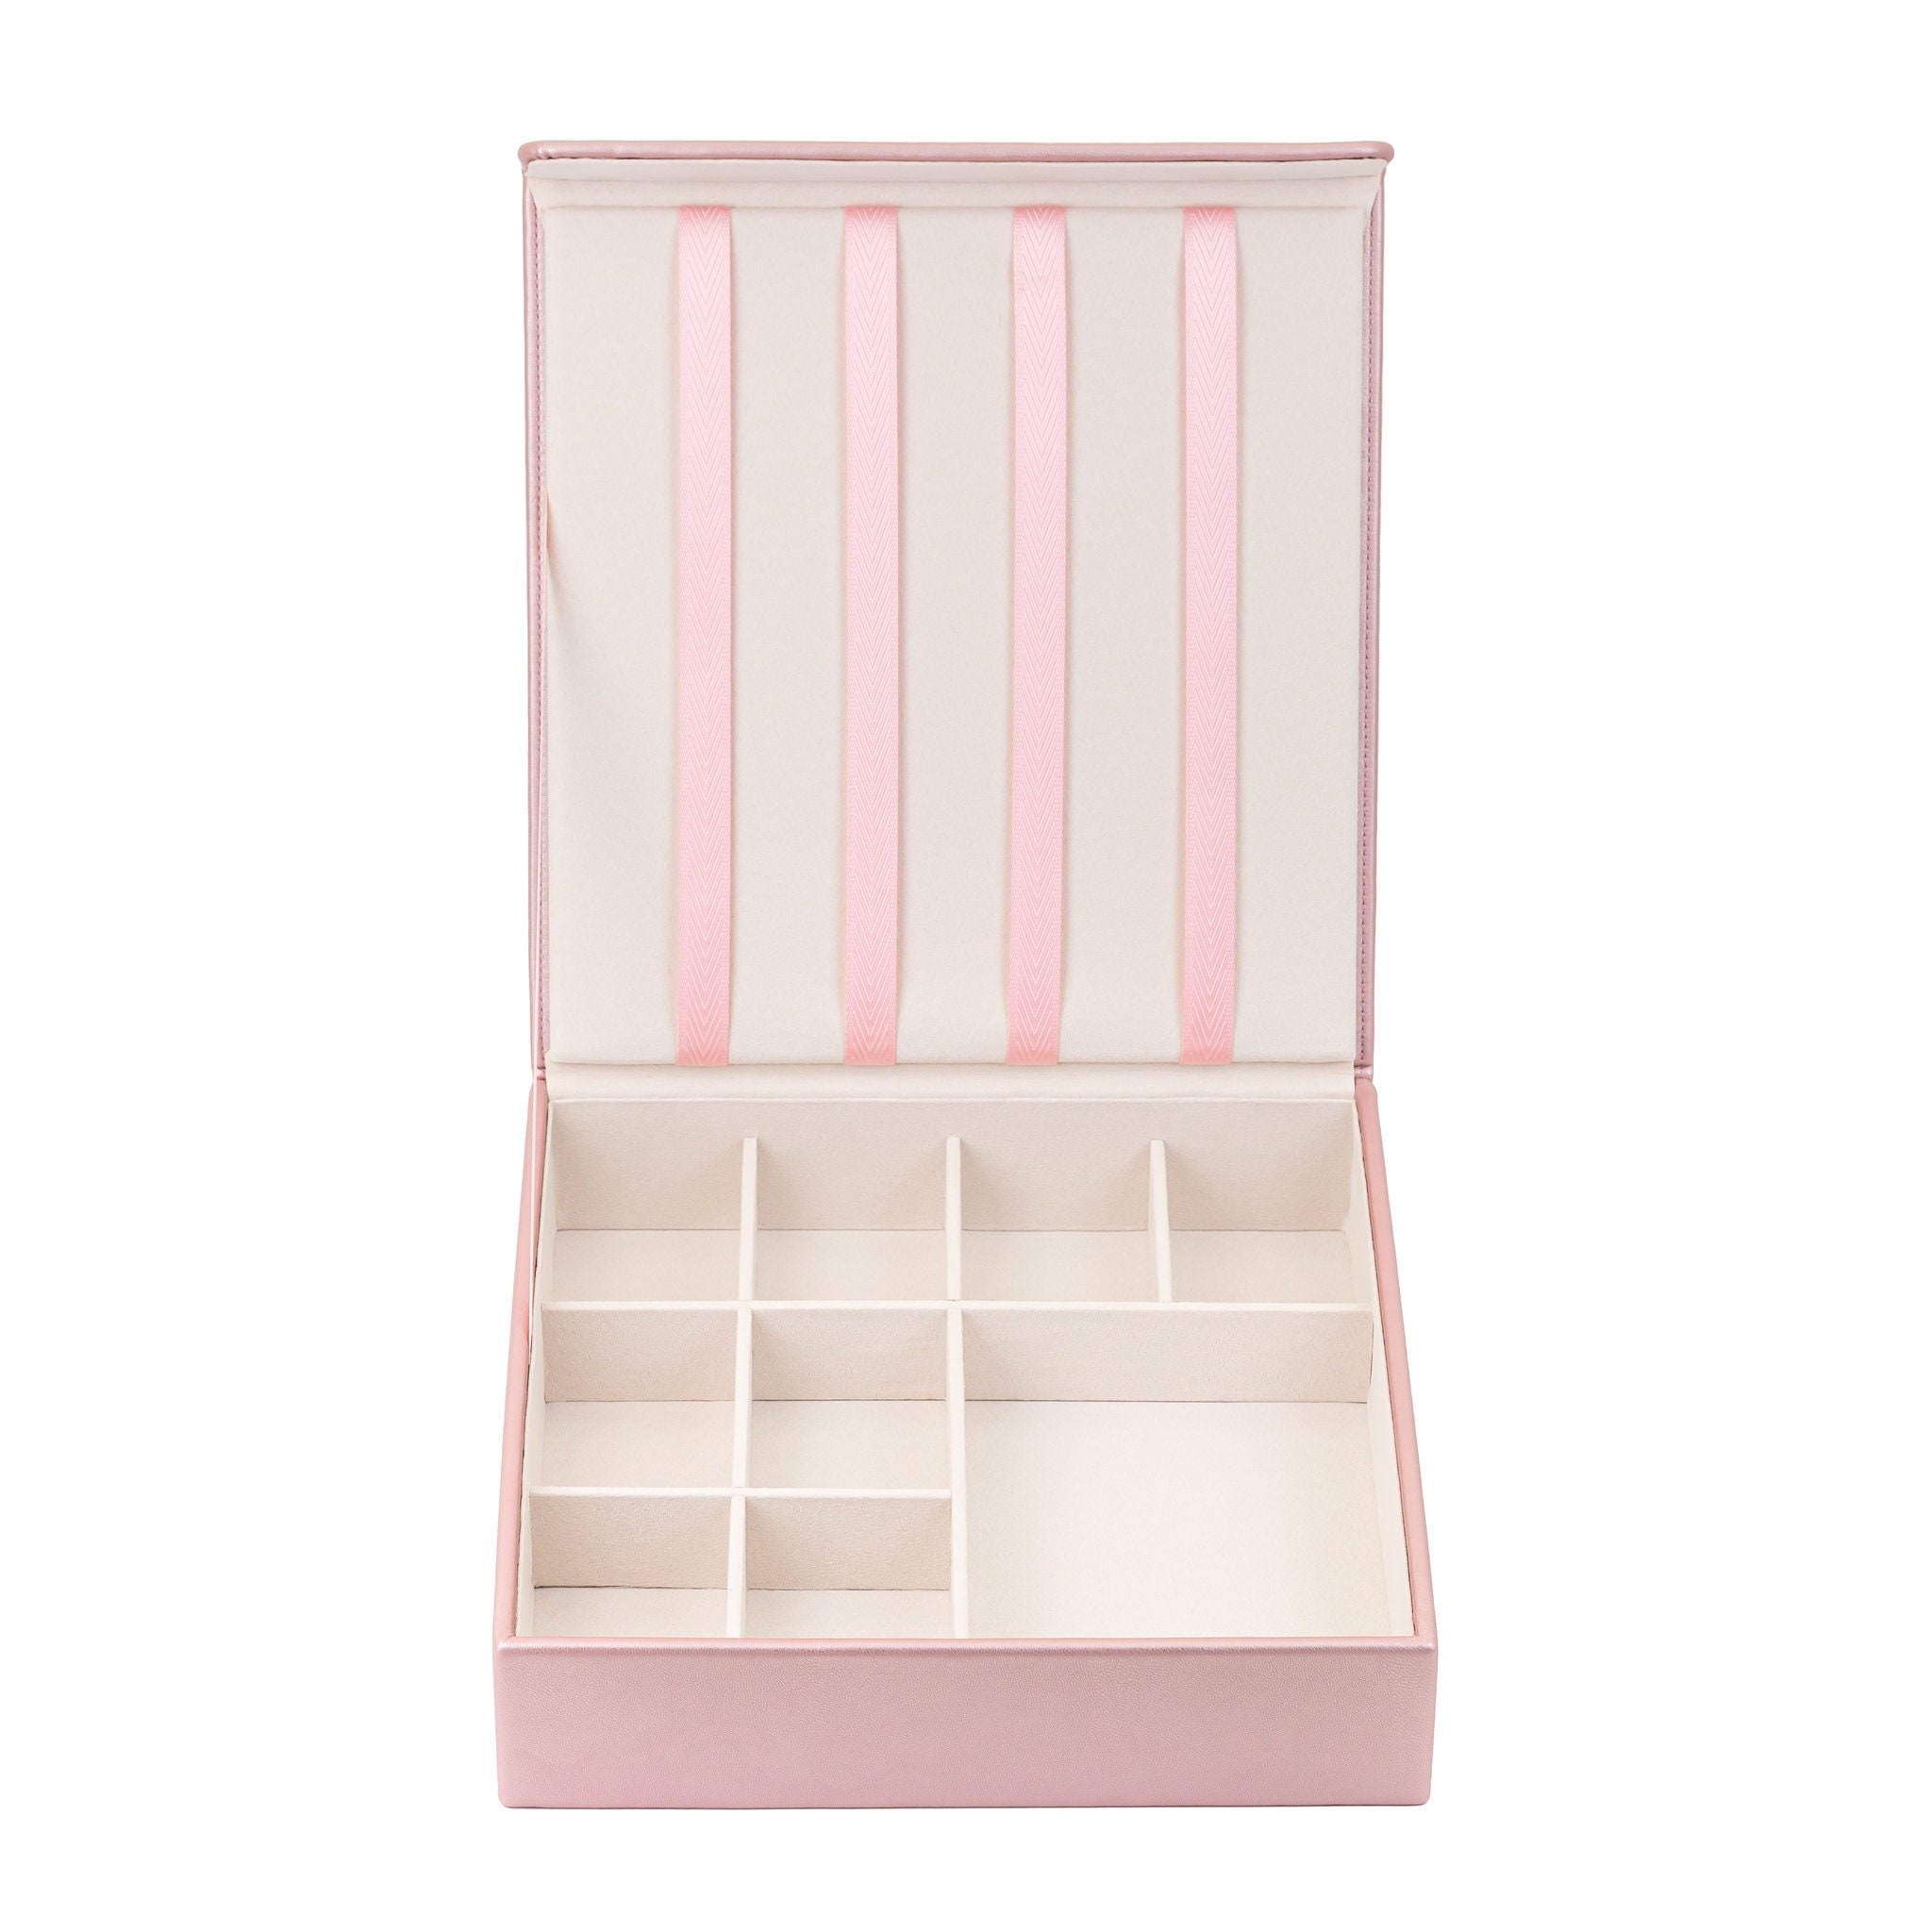 Cuticate Girl Hair Accessories Storage Box Jewelry Organizer for Headband Necklaces Pink, Infant Girl's, Size: 27cmx18cmx24cm